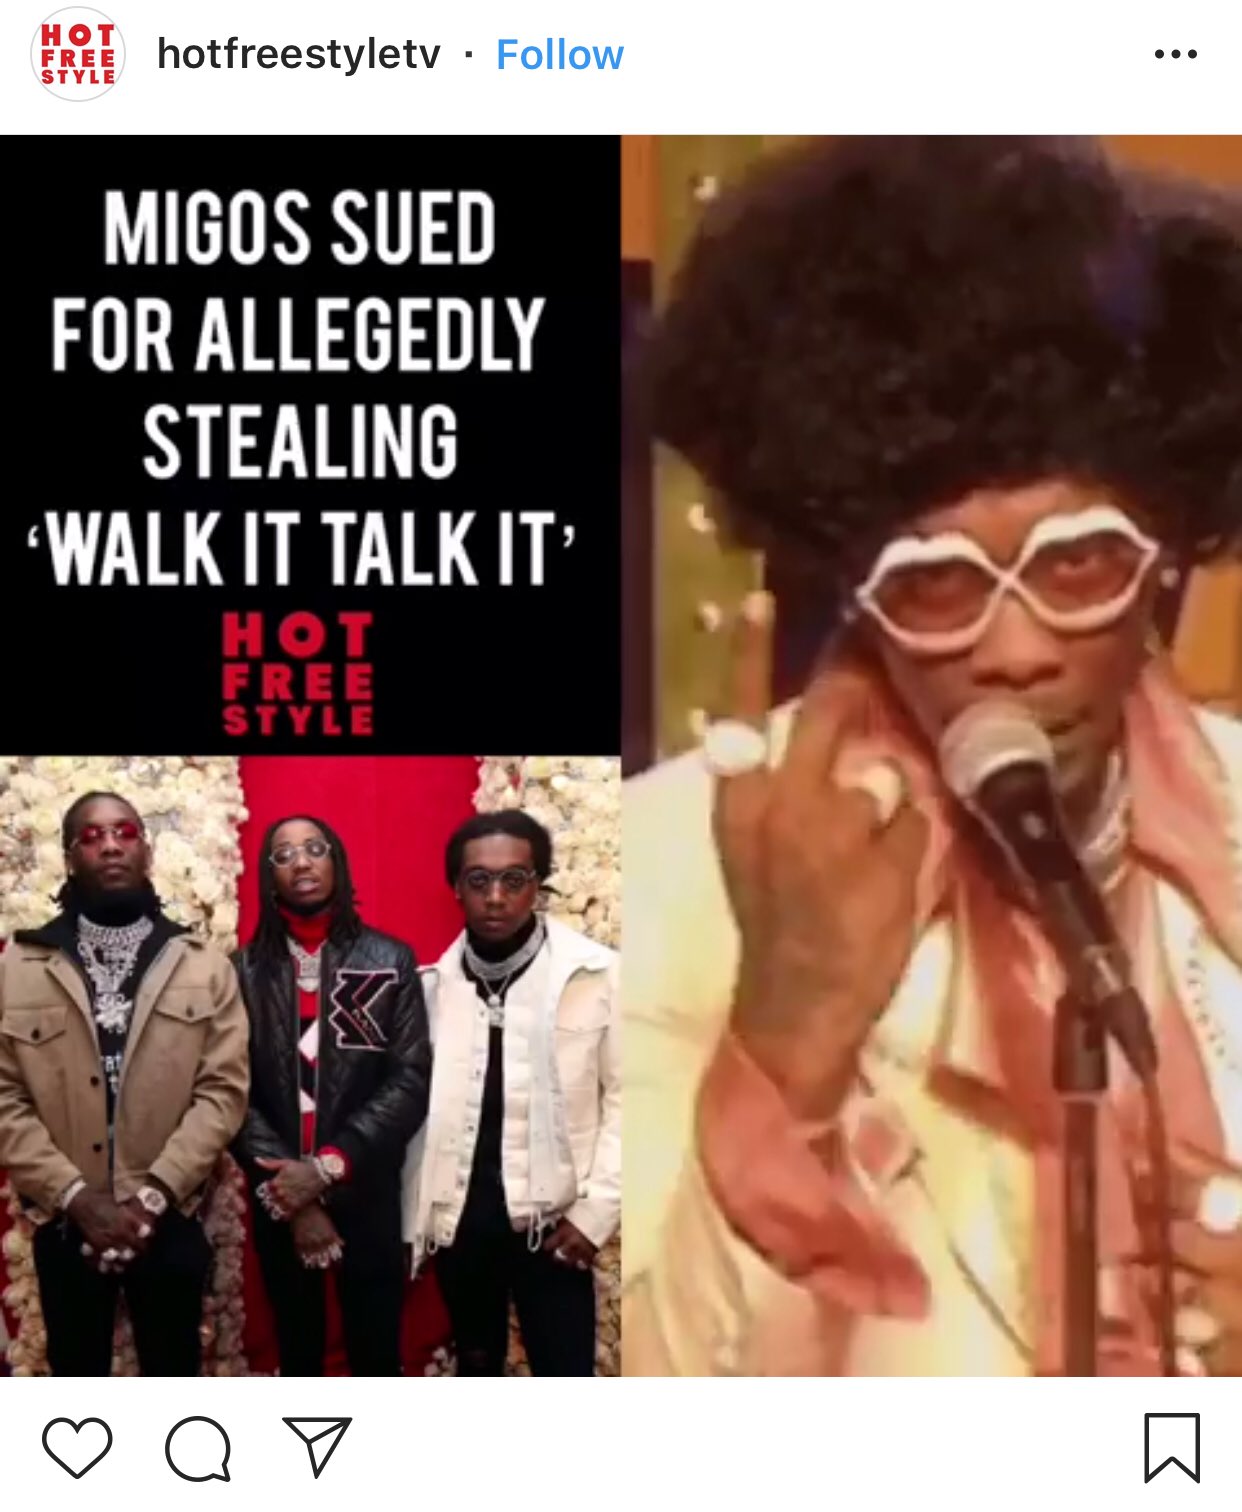 fløjte tang Personligt Rap It Up on Twitter: "WALK IT LIKE I TALK IT TO COURT! Rap group Migos are  supposedly being sued by rapper M.O.S for allegedly stealing his song “Walk  It, Tallk It”.